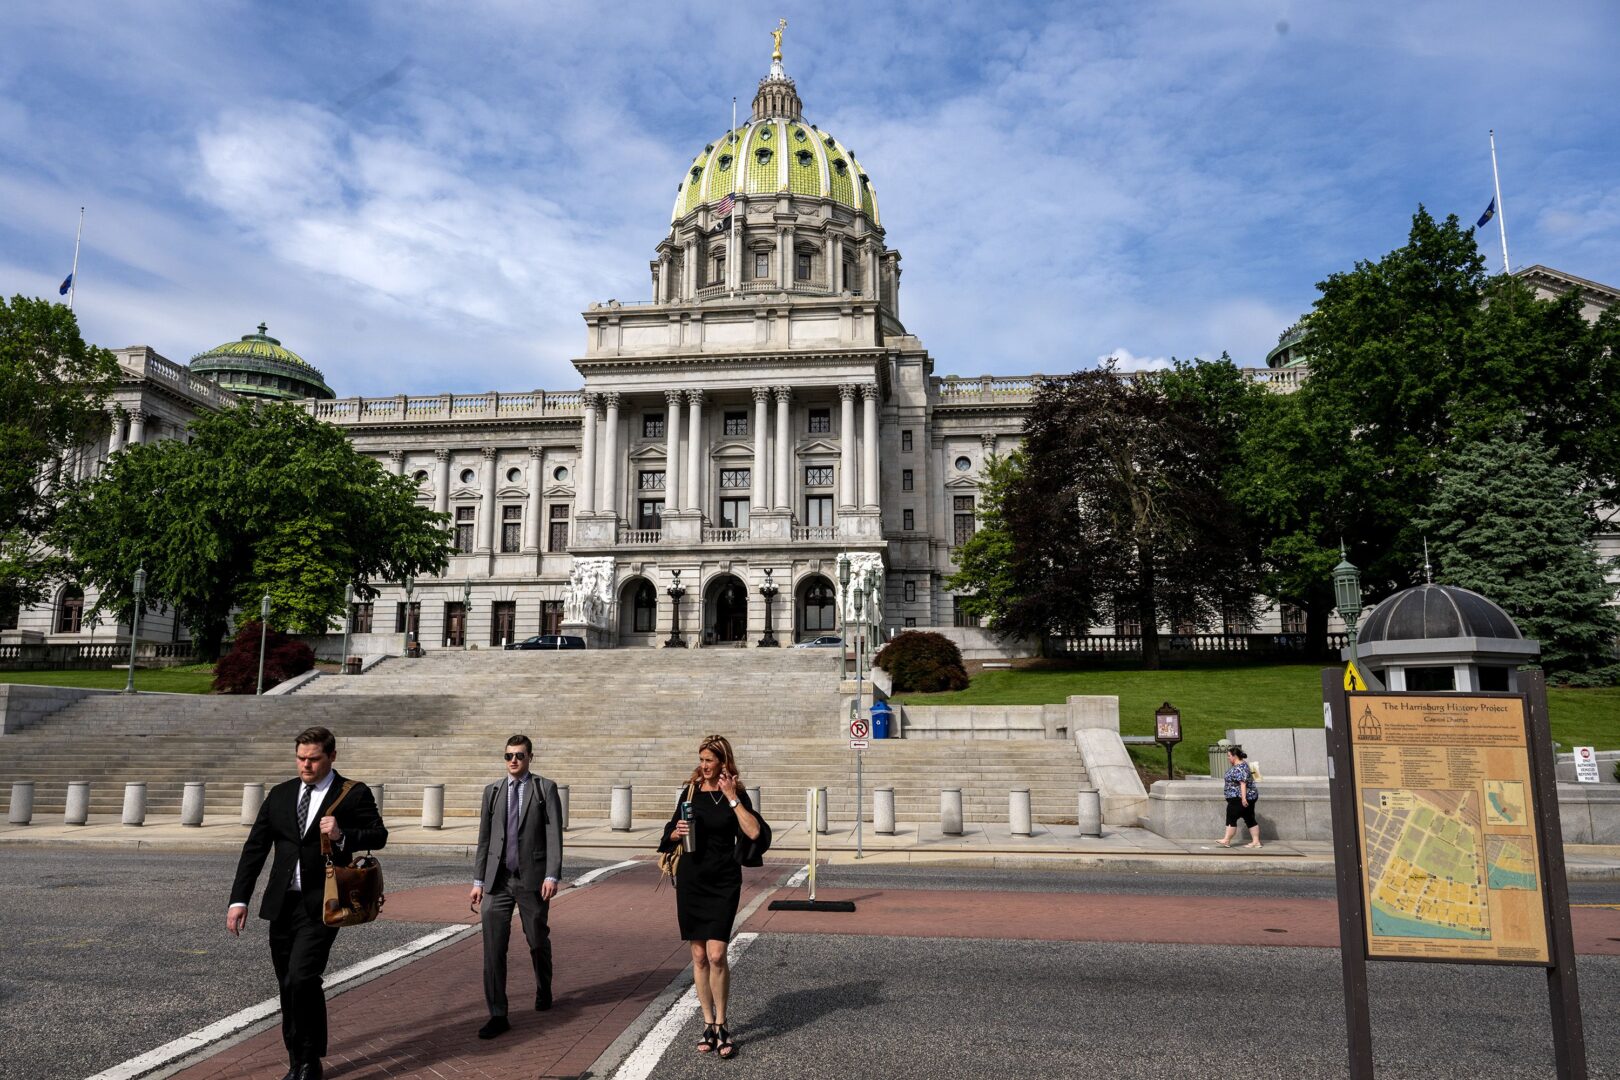 The Pennsylvania Capitol in Harrisburg is preparing for another legislative session.